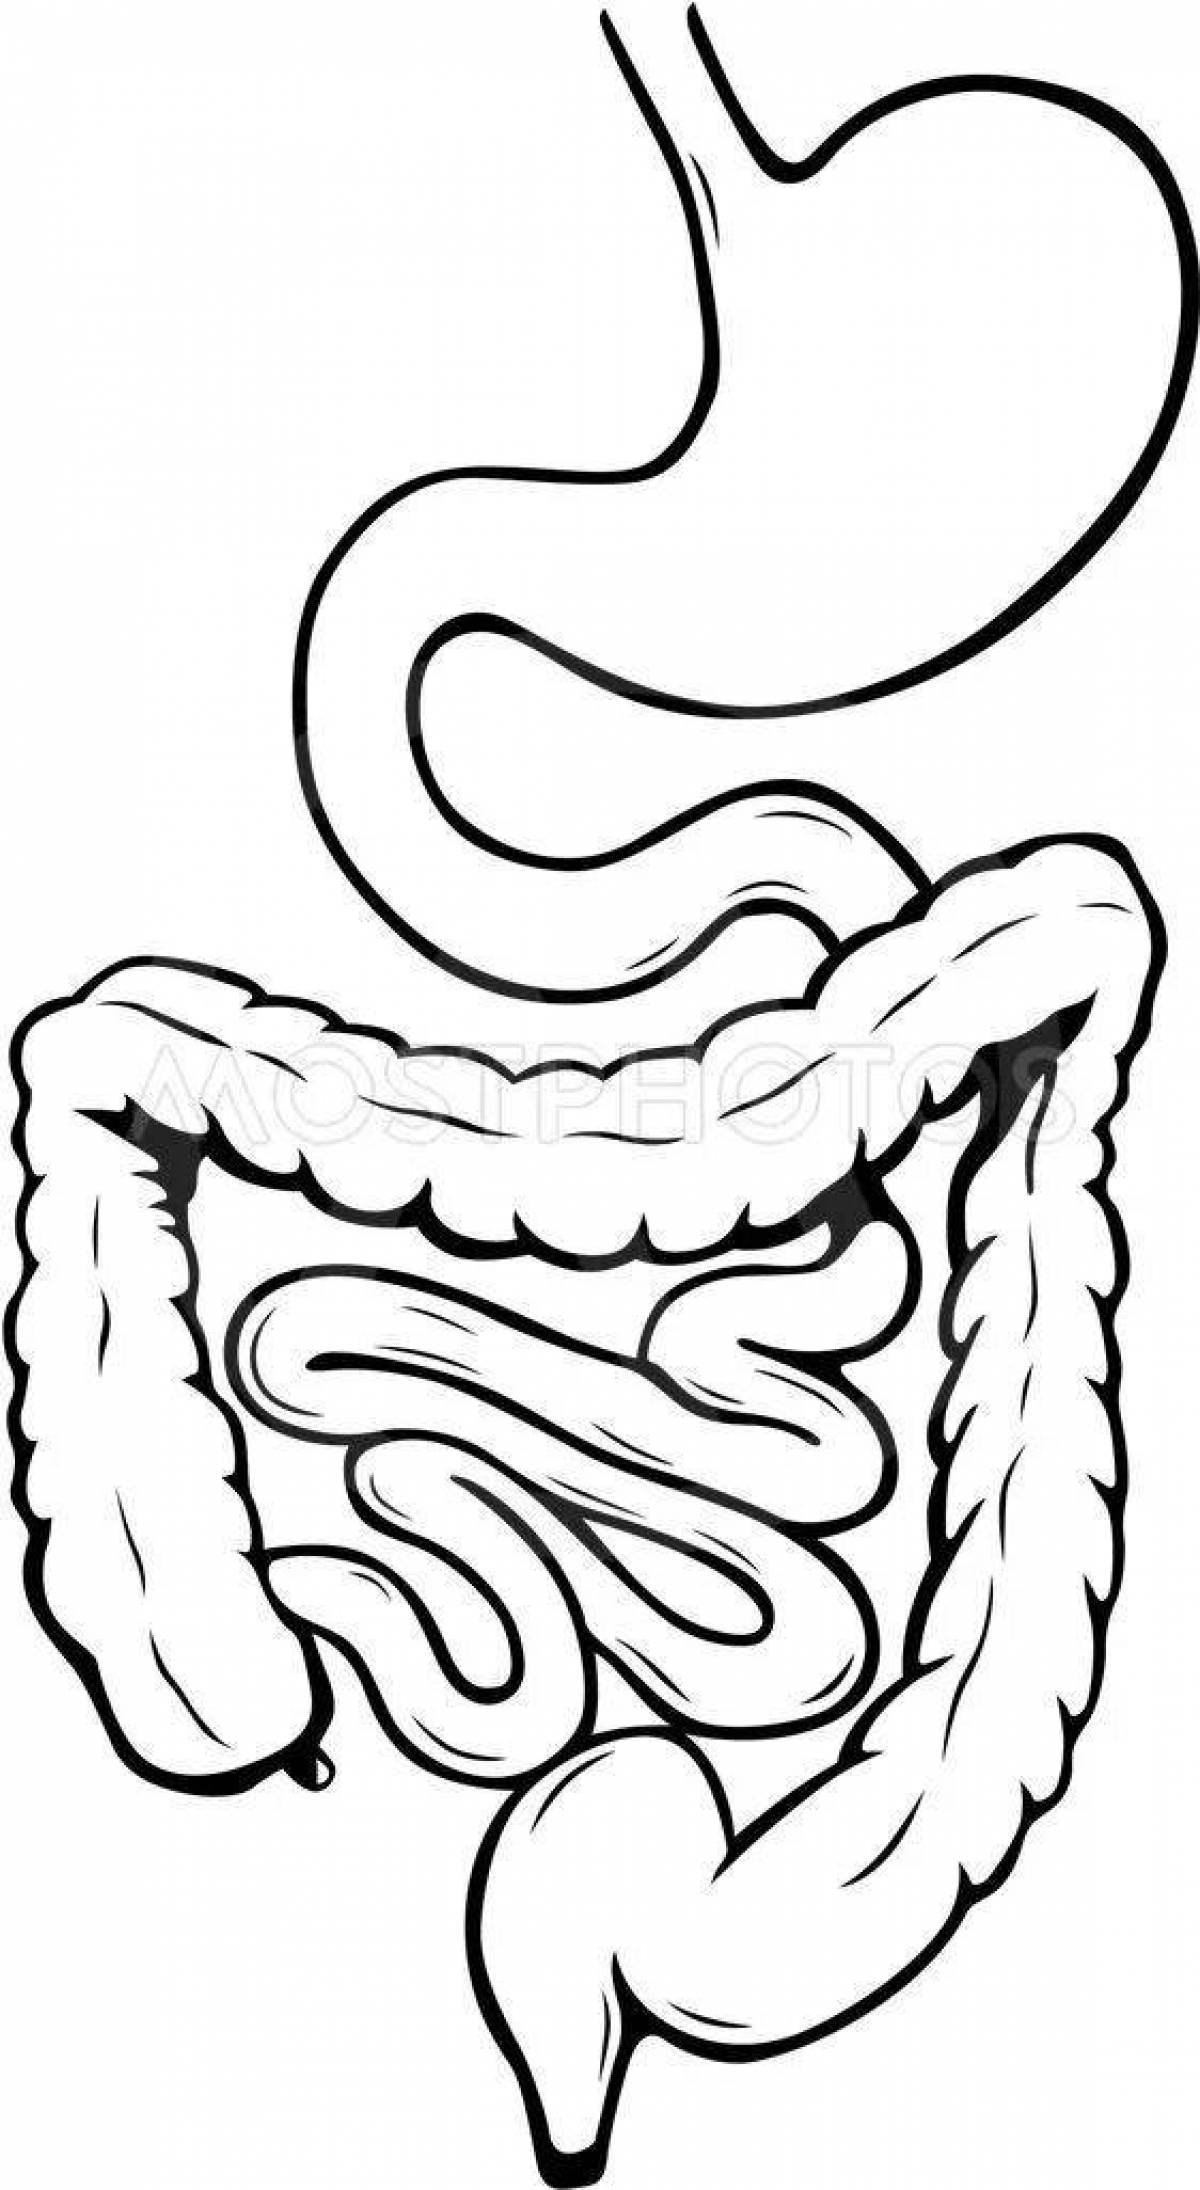 Charming human digestive system coloring book